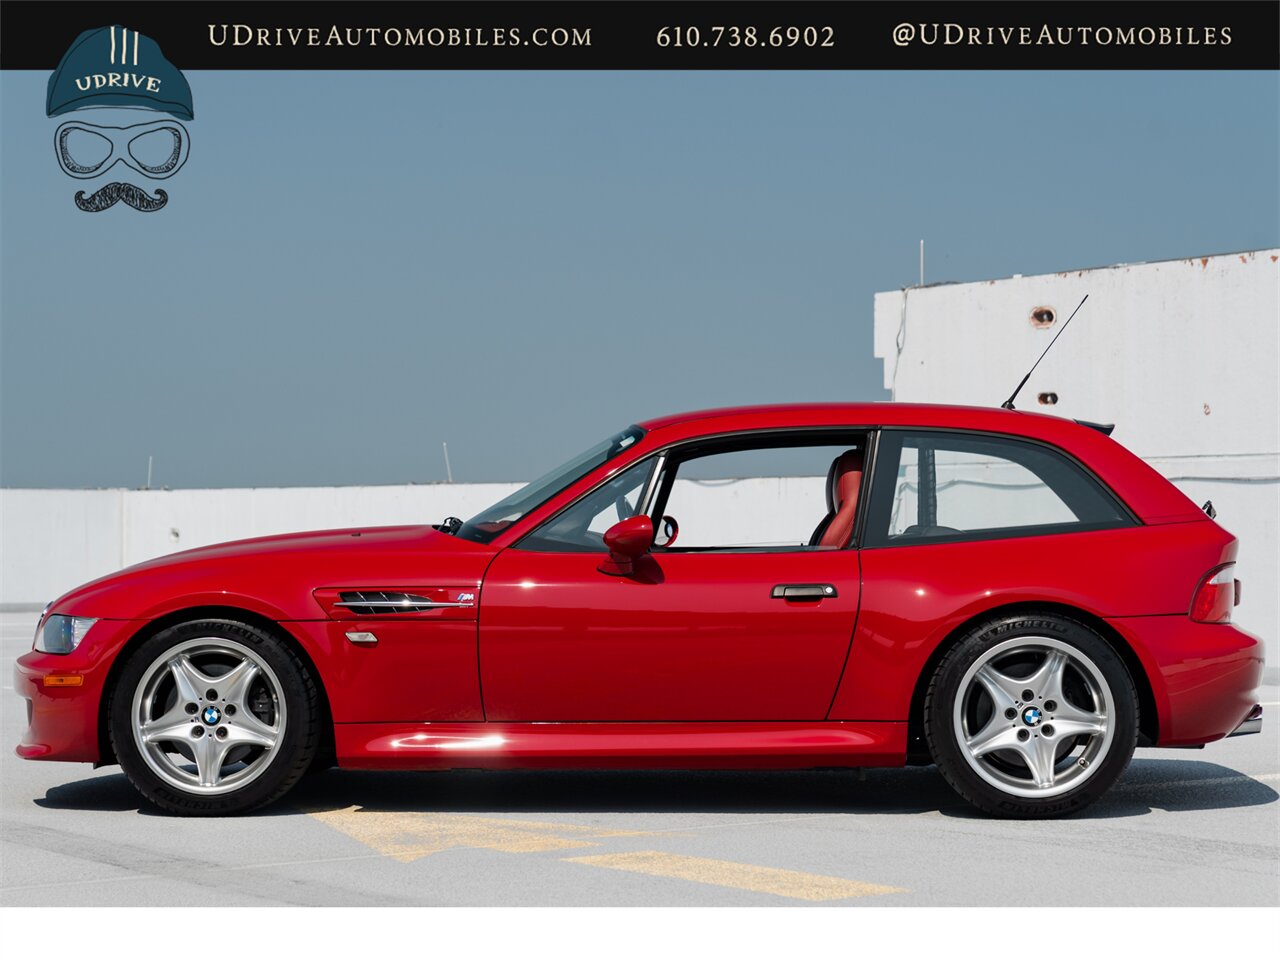 2000 BMW Z3 M  Coupe 25k Miles  Sunroof Delete $4k Recent Service - Photo 9 - West Chester, PA 19382